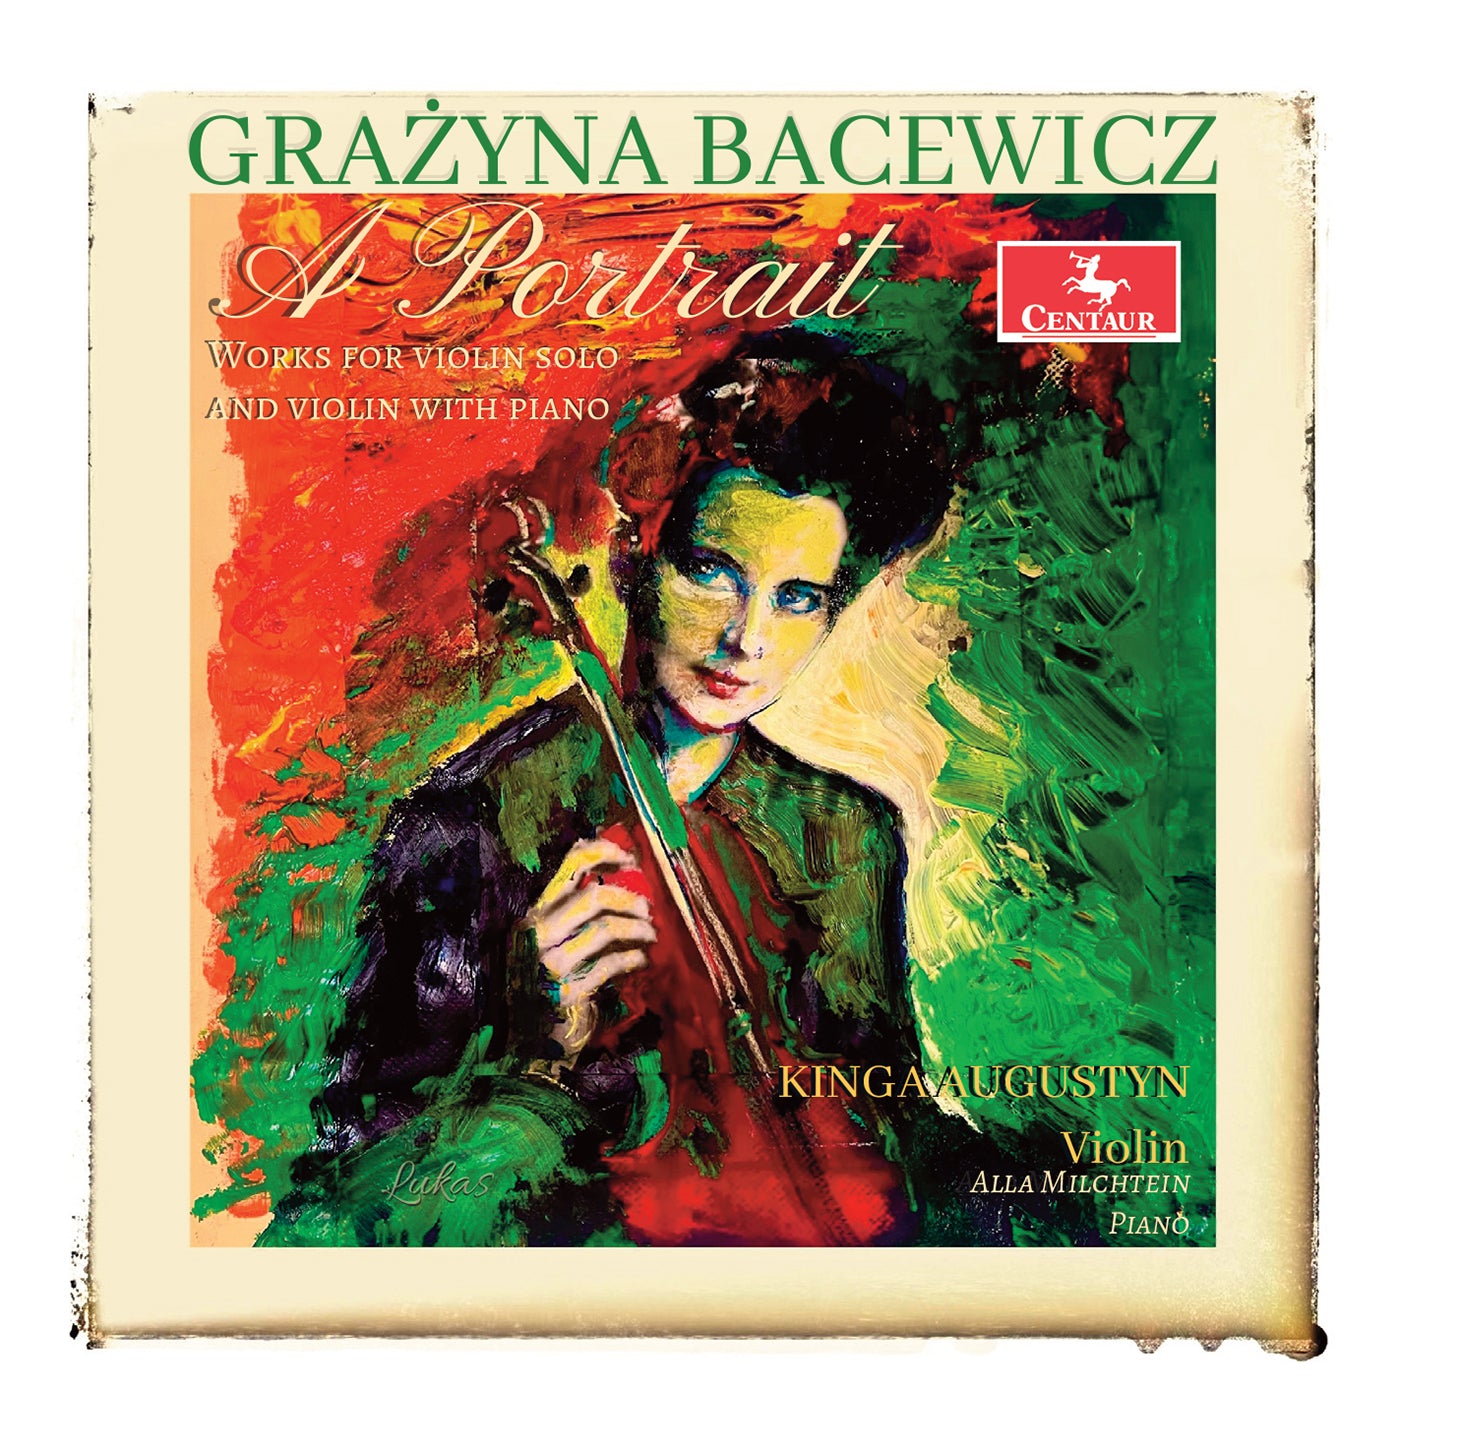 Bacewicz: A Portrait - Works for Violin Solo & with Piano / Augustyn, Milchtein